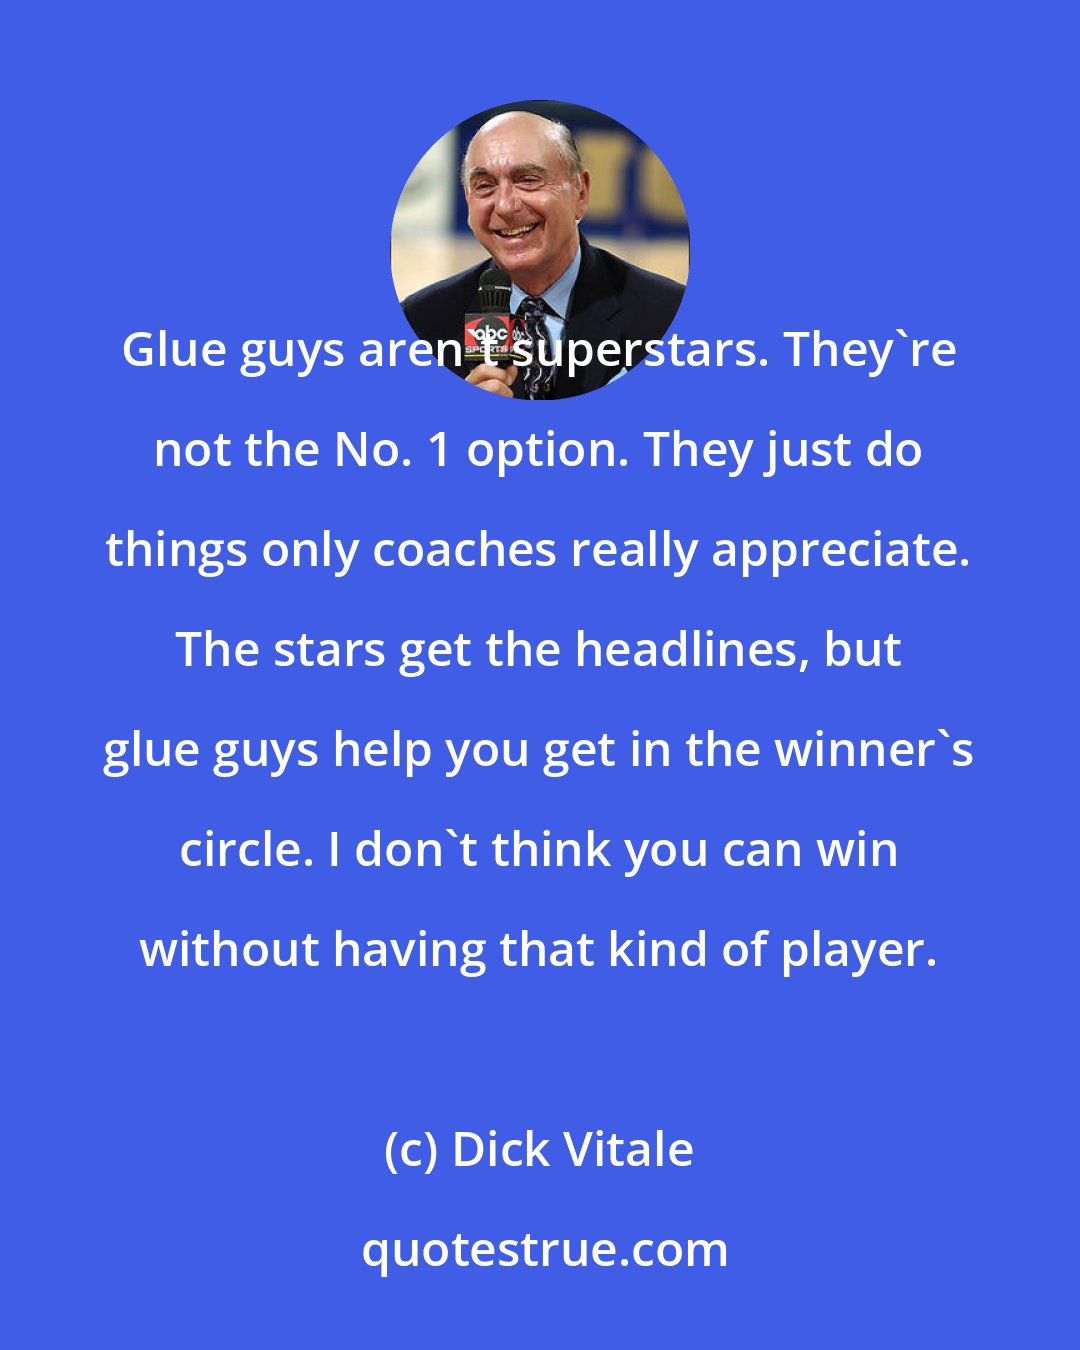 Dick Vitale: Glue guys aren't superstars. They're not the No. 1 option. They just do things only coaches really appreciate. The stars get the headlines, but glue guys help you get in the winner's circle. I don't think you can win without having that kind of player.